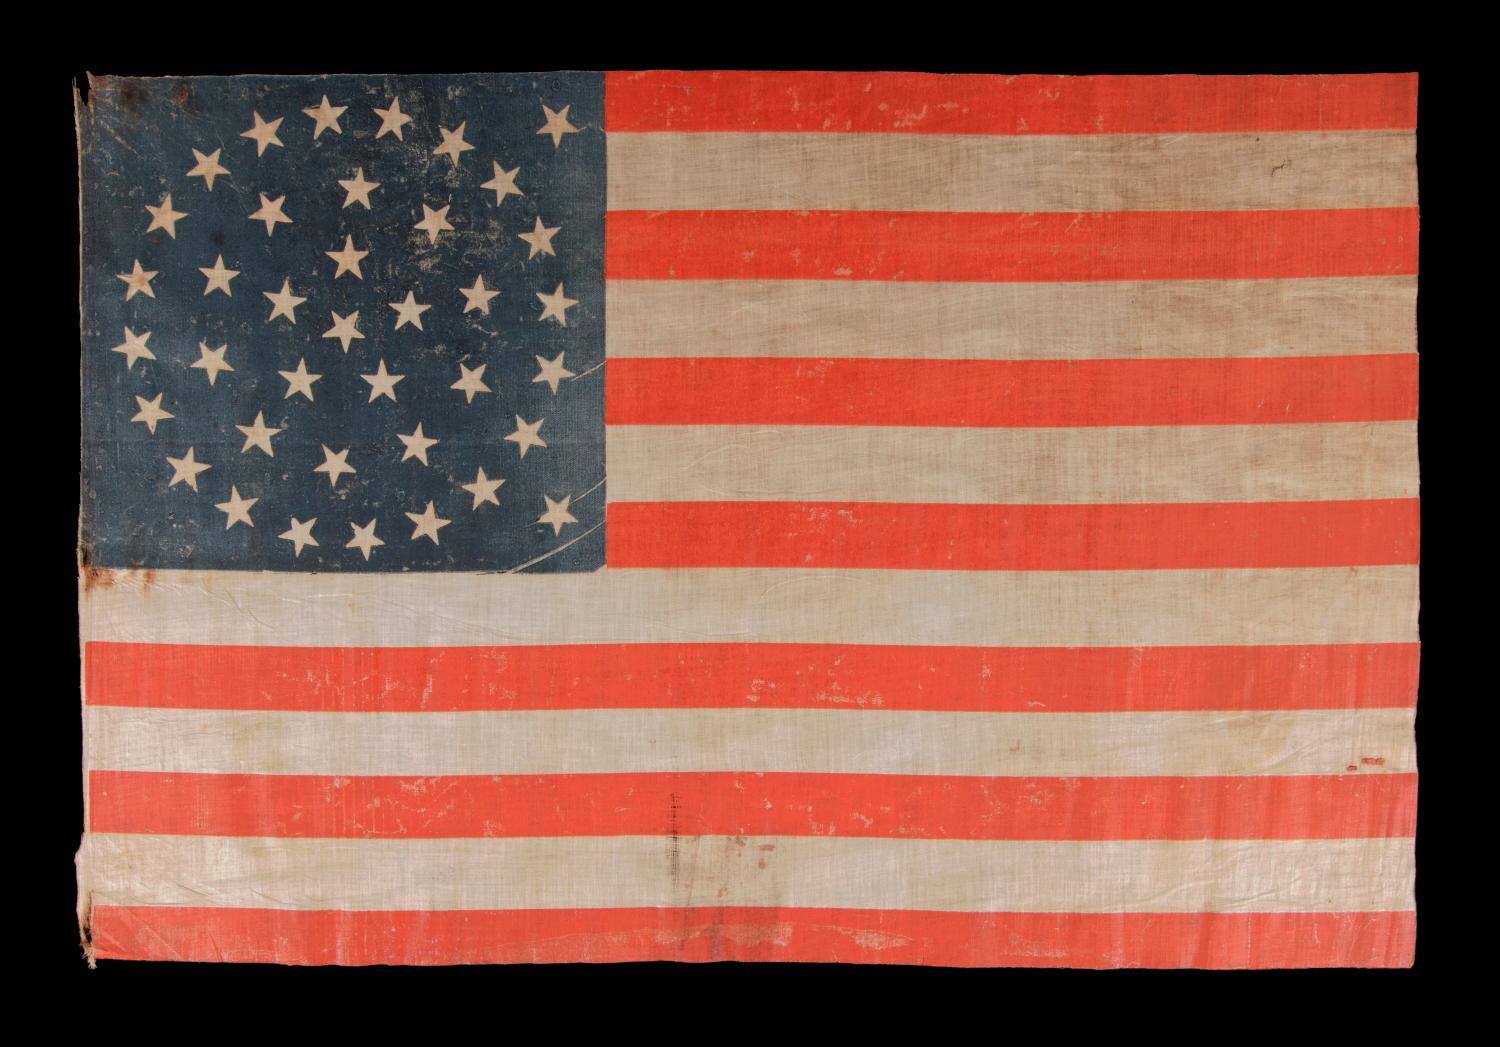 38 STARS IN A MEDALLION CONFIGURATION, WITH 2 OUTLIERS, ON A LARGE SCALE ANTIQUE AMERICAN PARADE FLAG, 1876-1889, COLORADO STATEHOOD:

 38 star American parade flag, block-printed by hand on coarse, glazed cotton. The stars are arranged in a